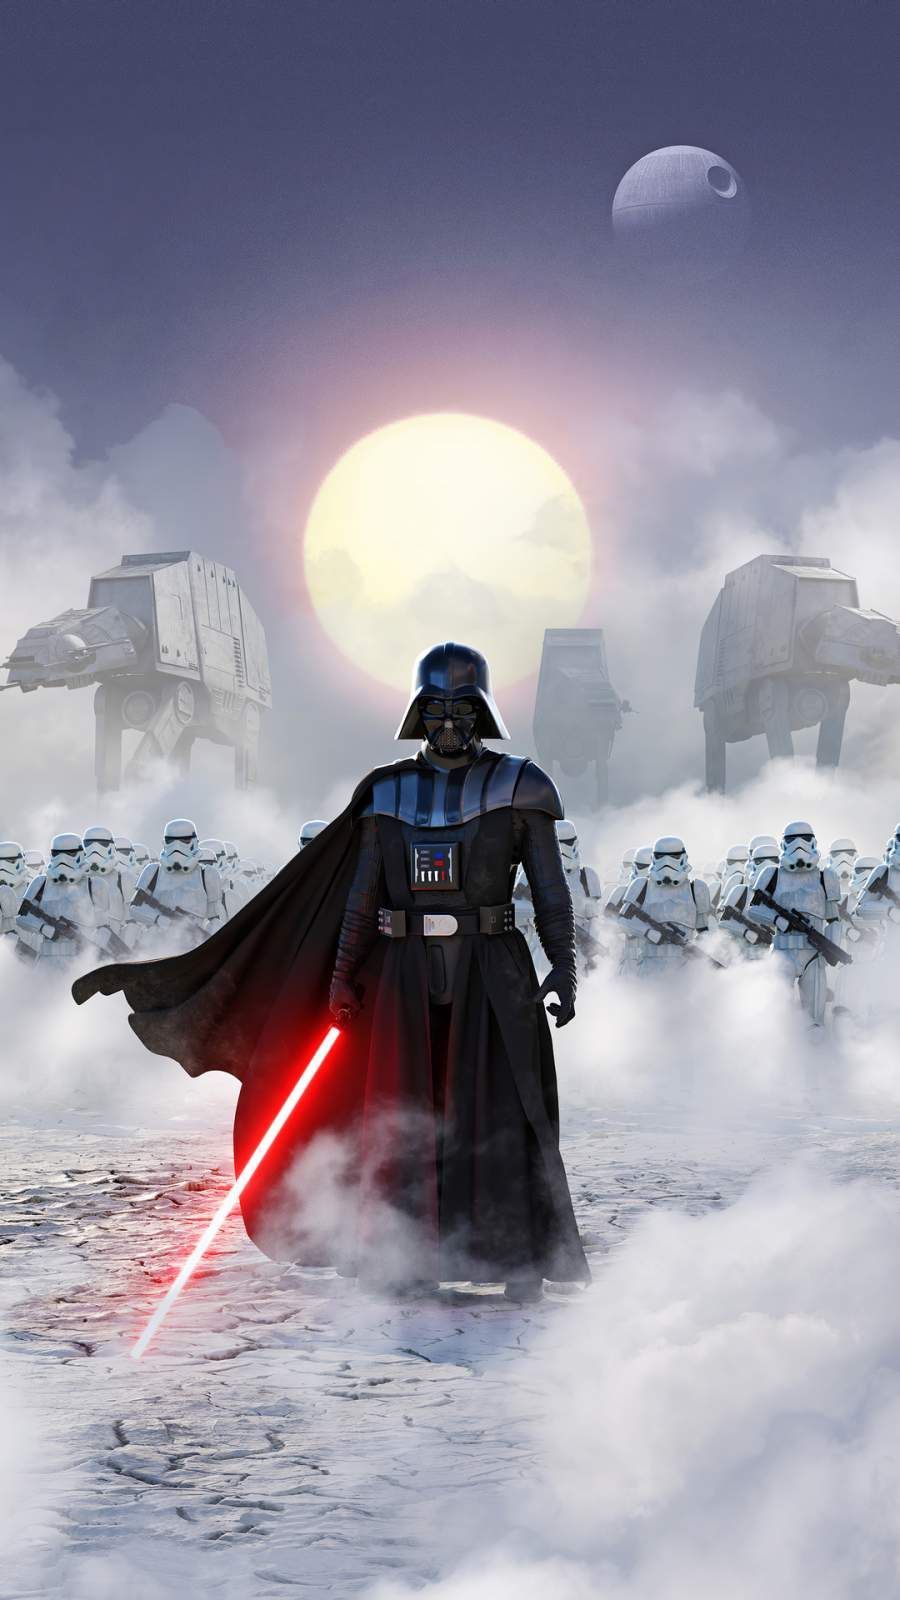 Darth Vader with a lightsaber in front of a group of Stormtroopers - Darth Vader